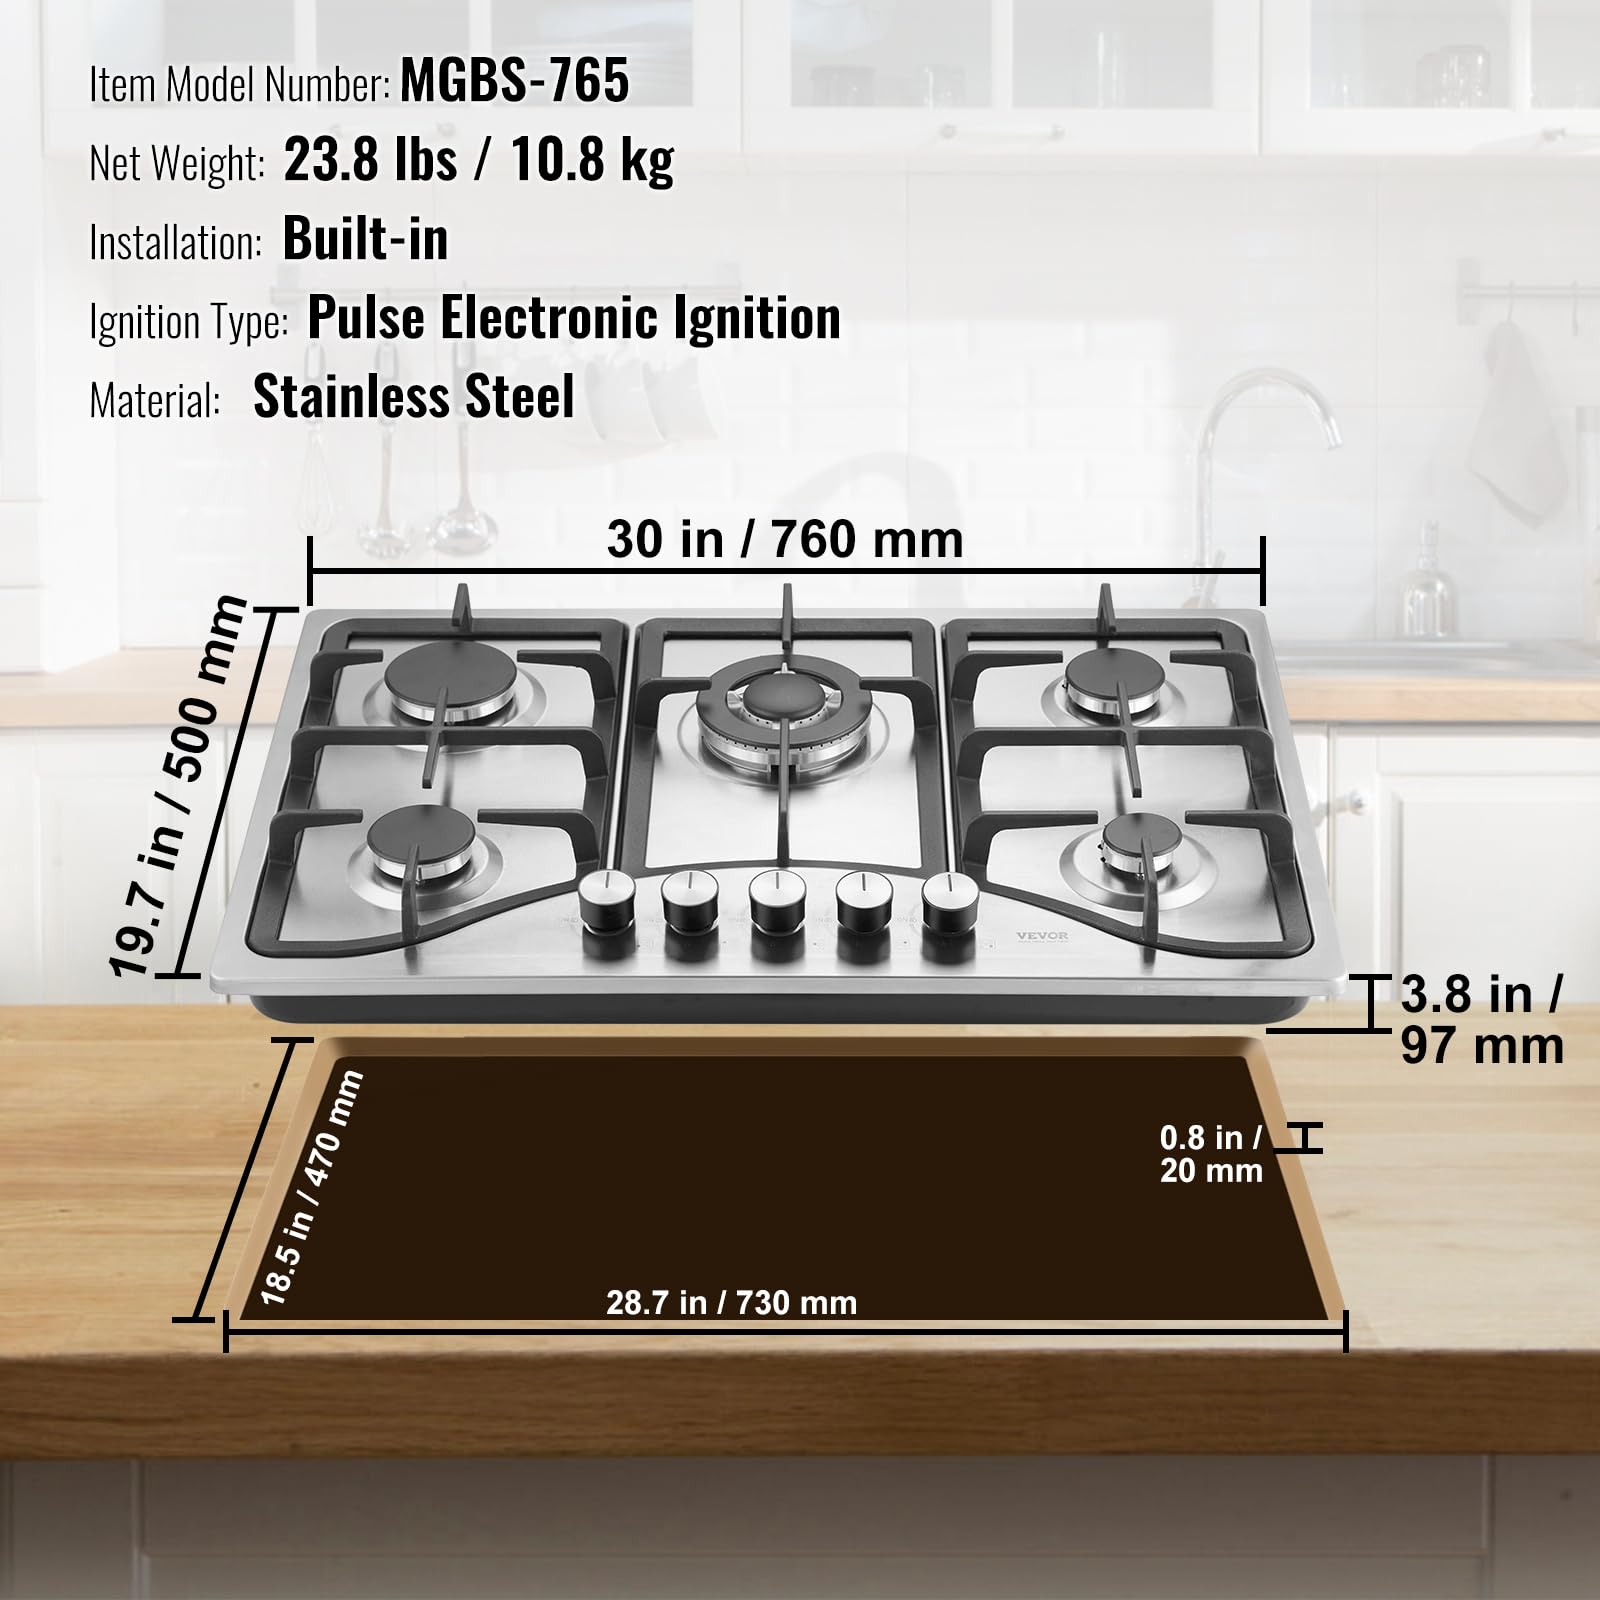 VEVOR 30-inch Gas Cooktop, 5 Burners Built-in Gas Stove Top, Max 12250BTU NG/LPG Convertible Stainless Steel Natural Gas Hob, with Thermocouple Protection for Camping, RV, Apartment